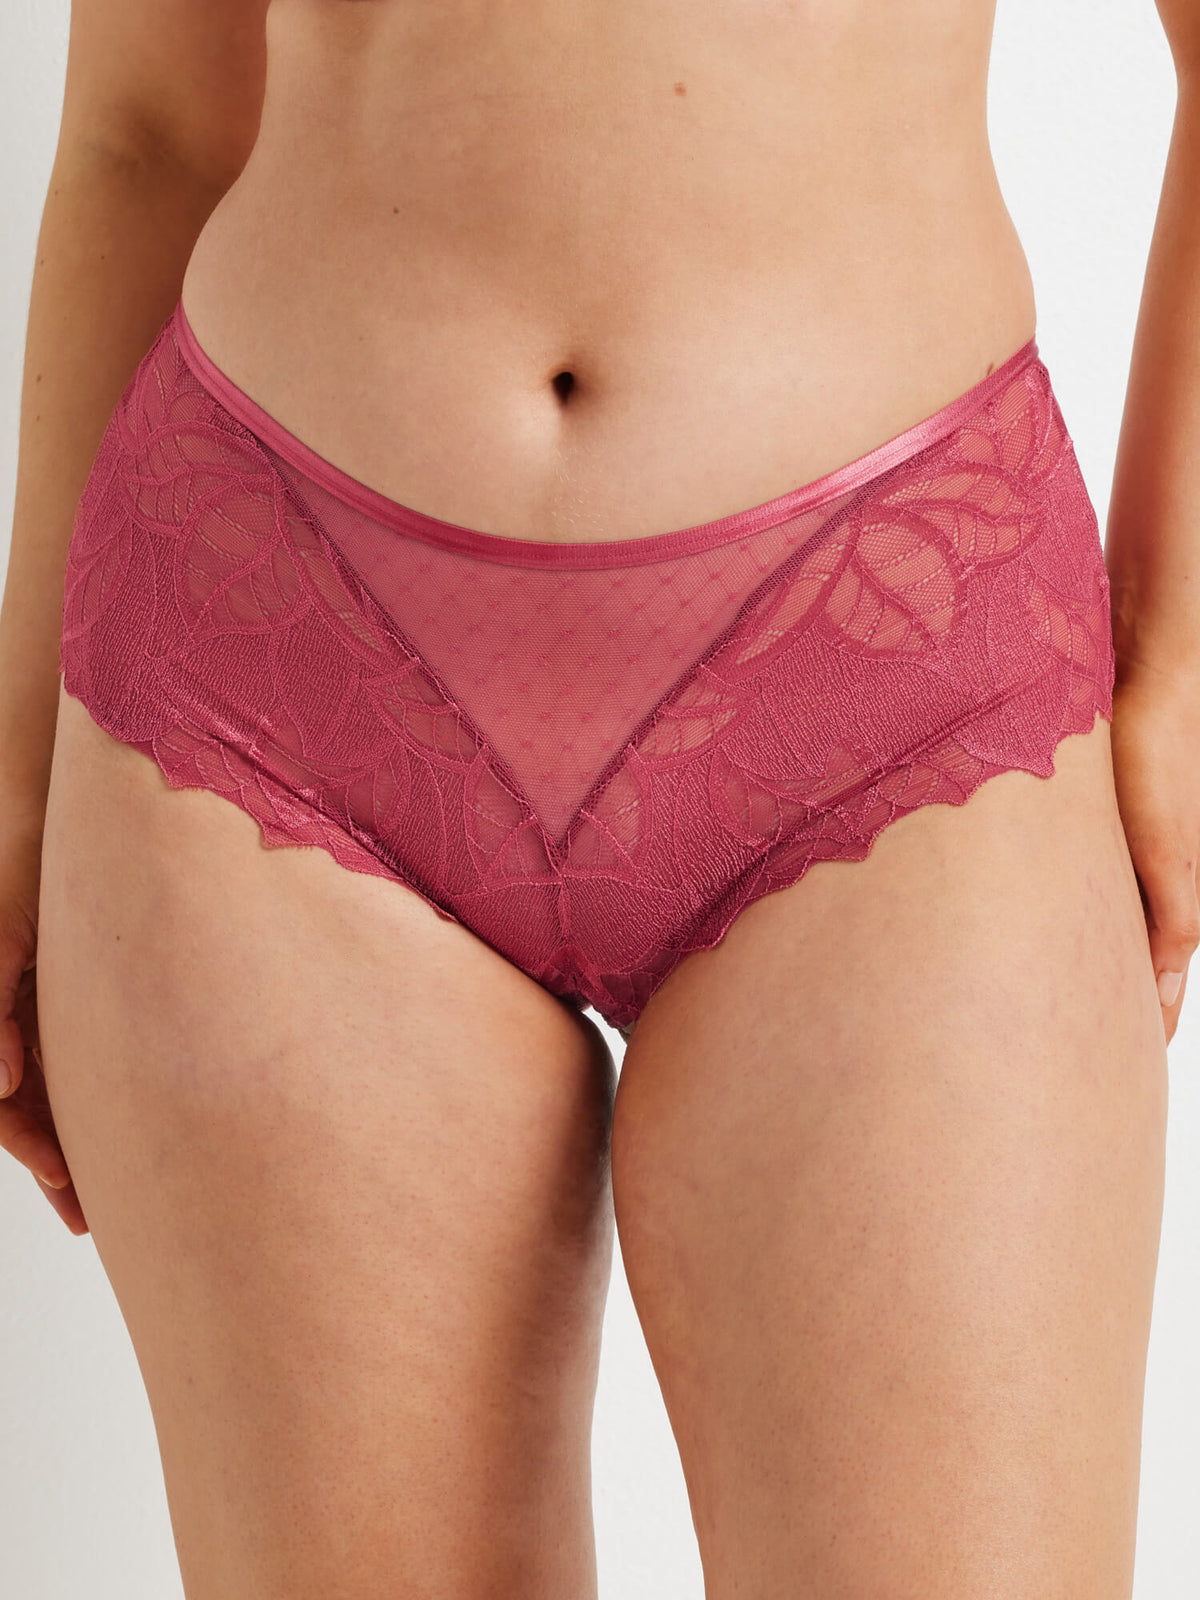 After Dark Frenchy Lace Short in Spice - Kayser Lingerie